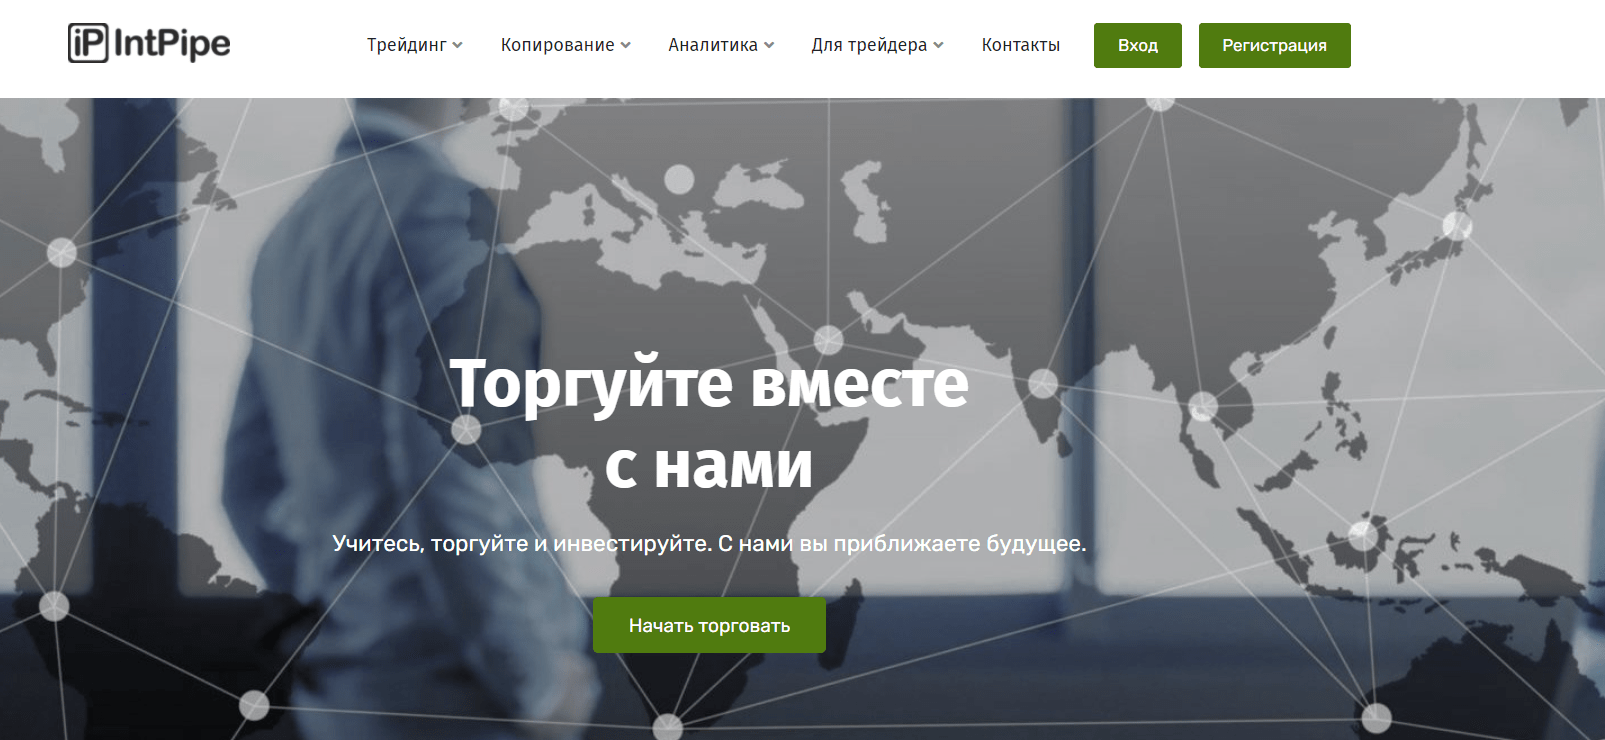 IntPipe - скромная афера, Фото № 1 - 1-consult.net